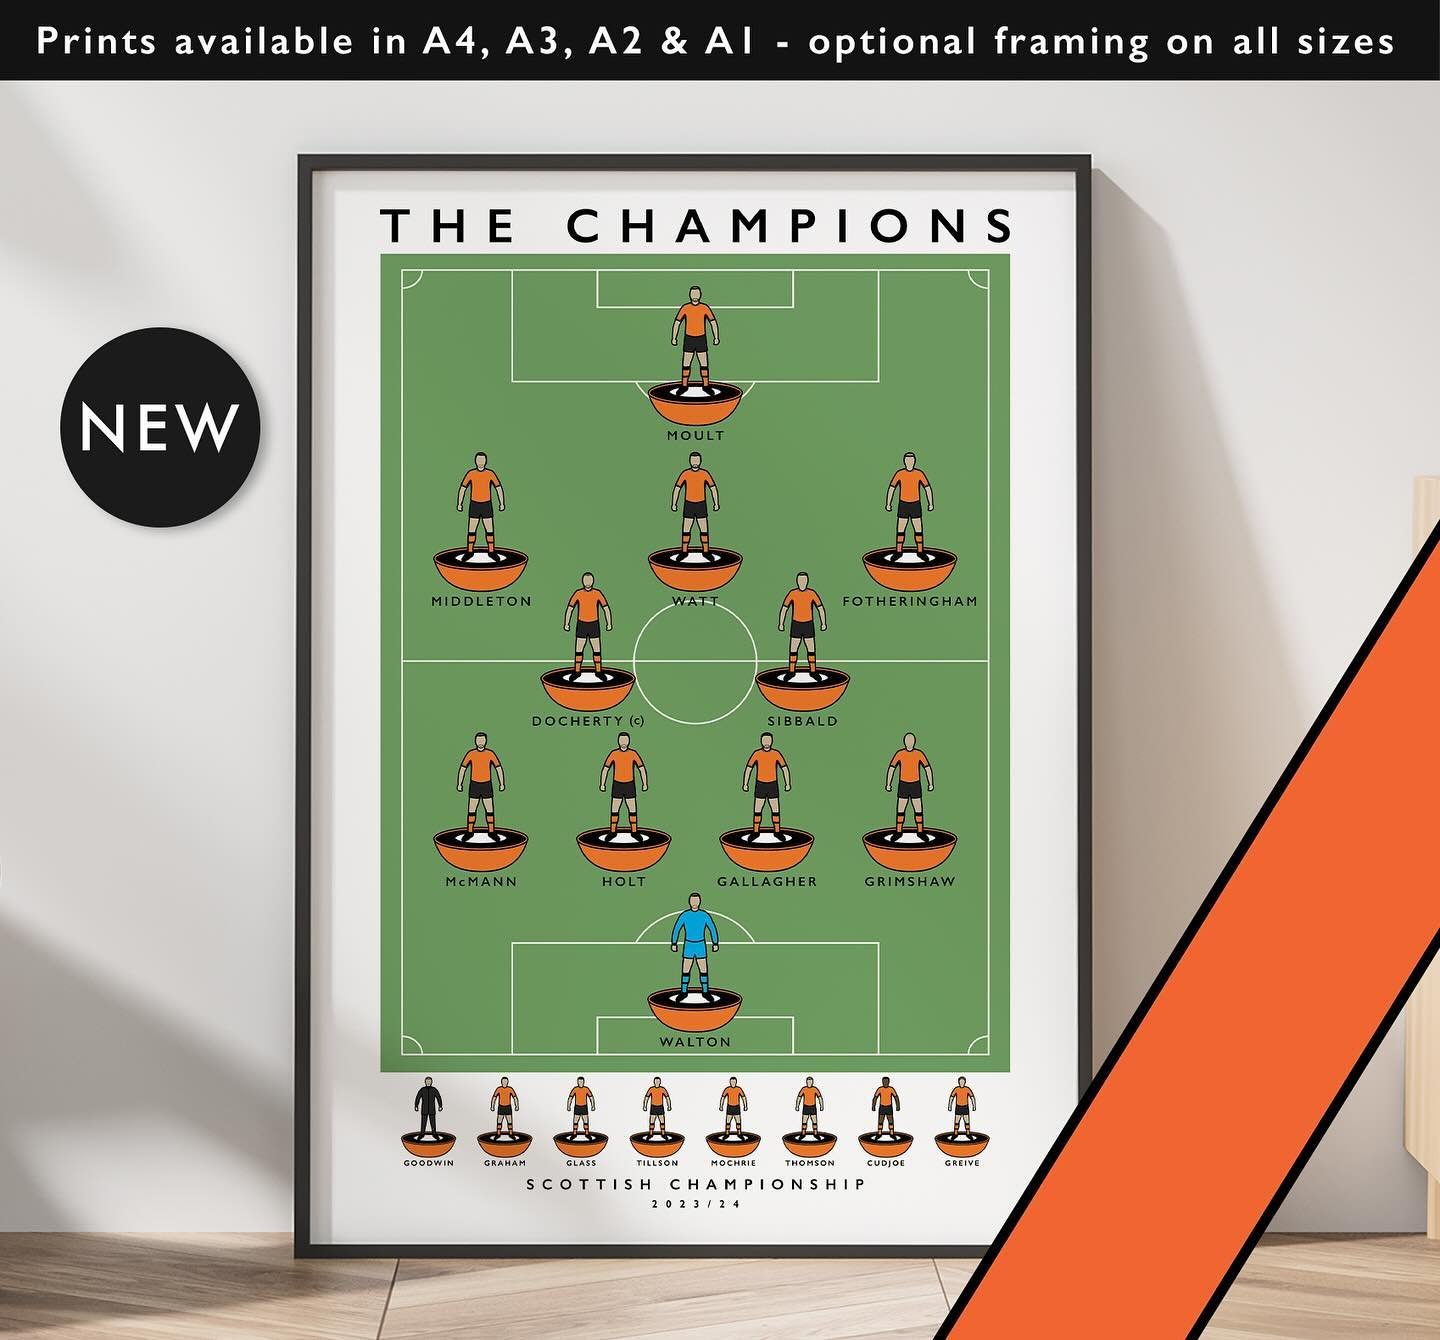 NEW: Dundee United The Champions 23/24 

Prints available in A4, A3, A2 &amp; A1 with optional framing 

Get 10% off until midnight on Monday with the discount code:
THE-TERRORS

Shop now: matthewjiwood.com/subbuteo-xis/d&hellip;

#terrors #arabs #Du